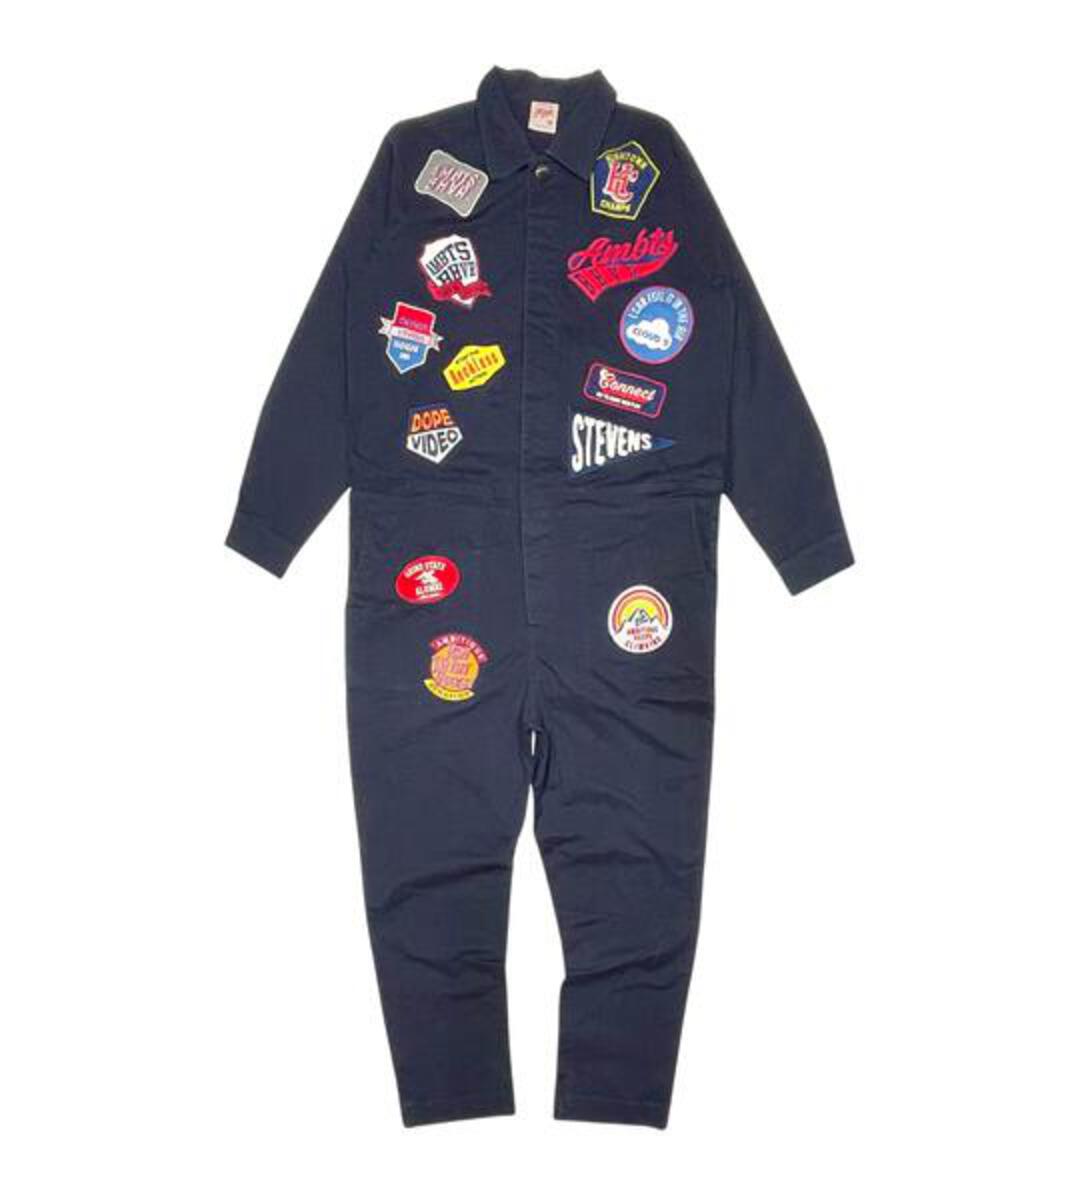 Men, Boys, Teens, Gifts, Wmns, Girls, Urban, Style, Fashion, Ambit Patchwork Overalls, Navy Blue, Ambit, Jumper, Patches, Multi, 